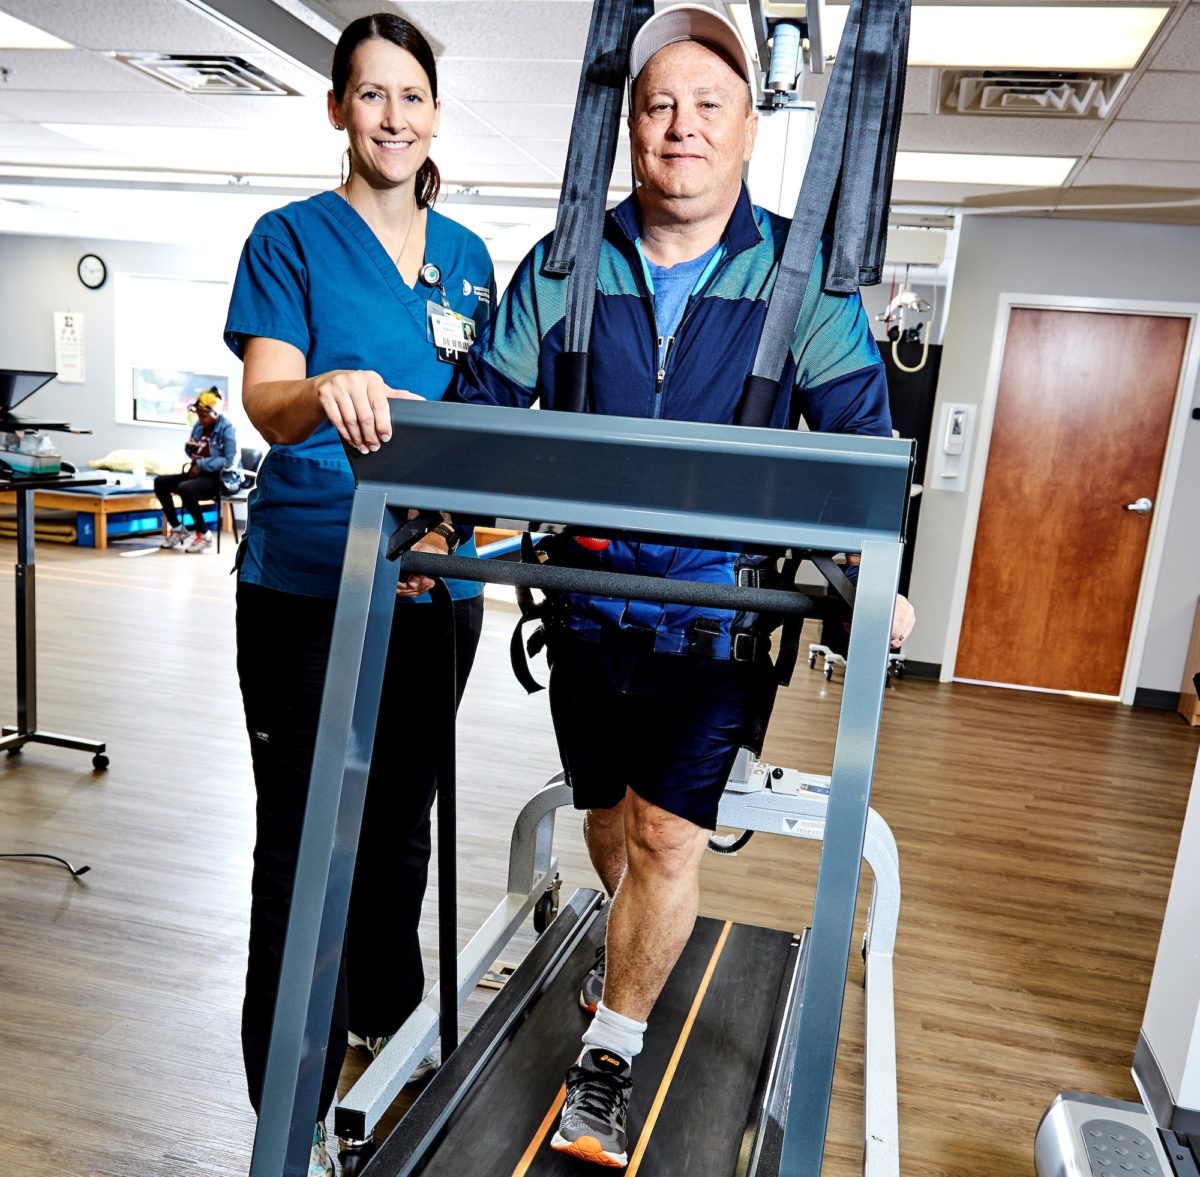 Stacy Gandia, MPT, with patient Stephen Woodward, who enrolled in the PROWALKS study